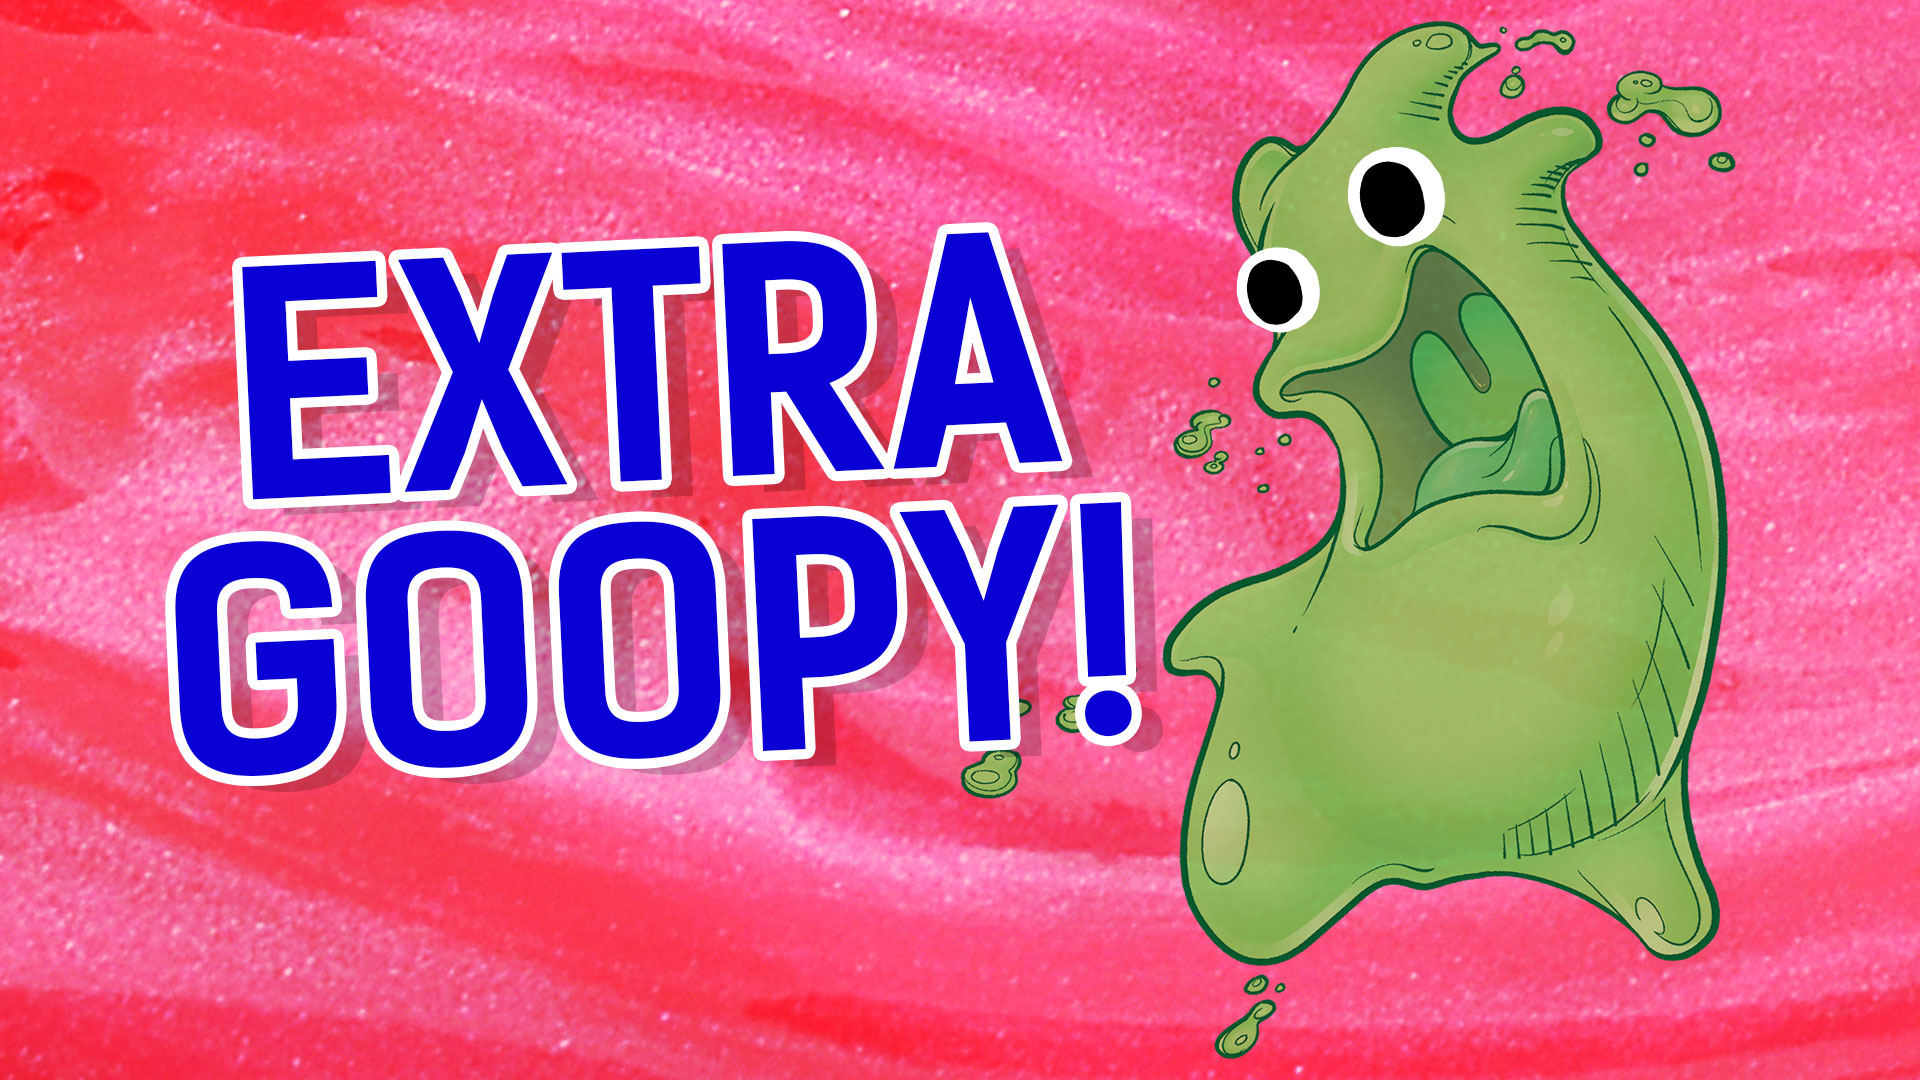 Result: Extra Goopy